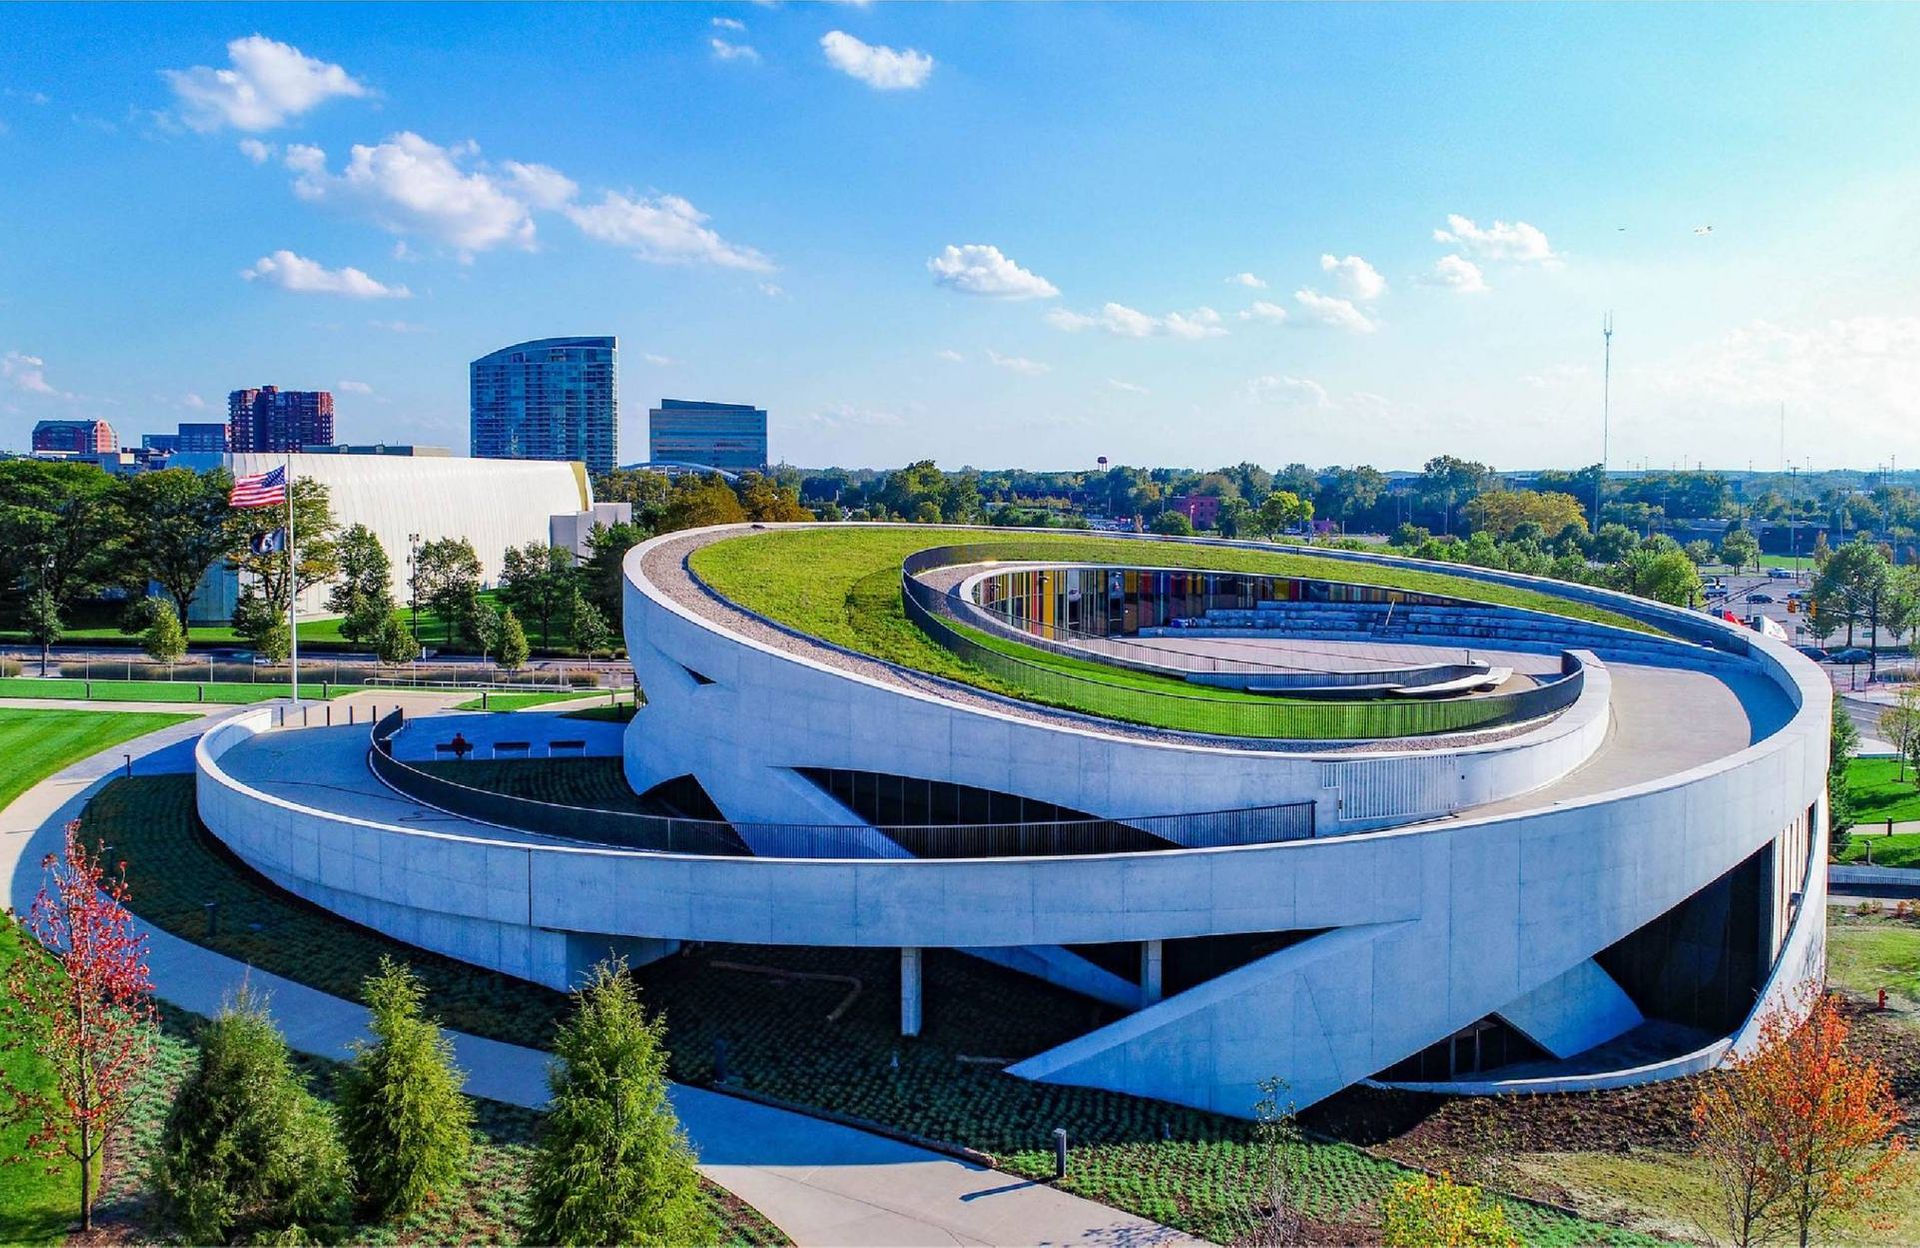 Exterior of a circular building with a ramp up to a green roof. Next Avenue, national veterans memorial and museum